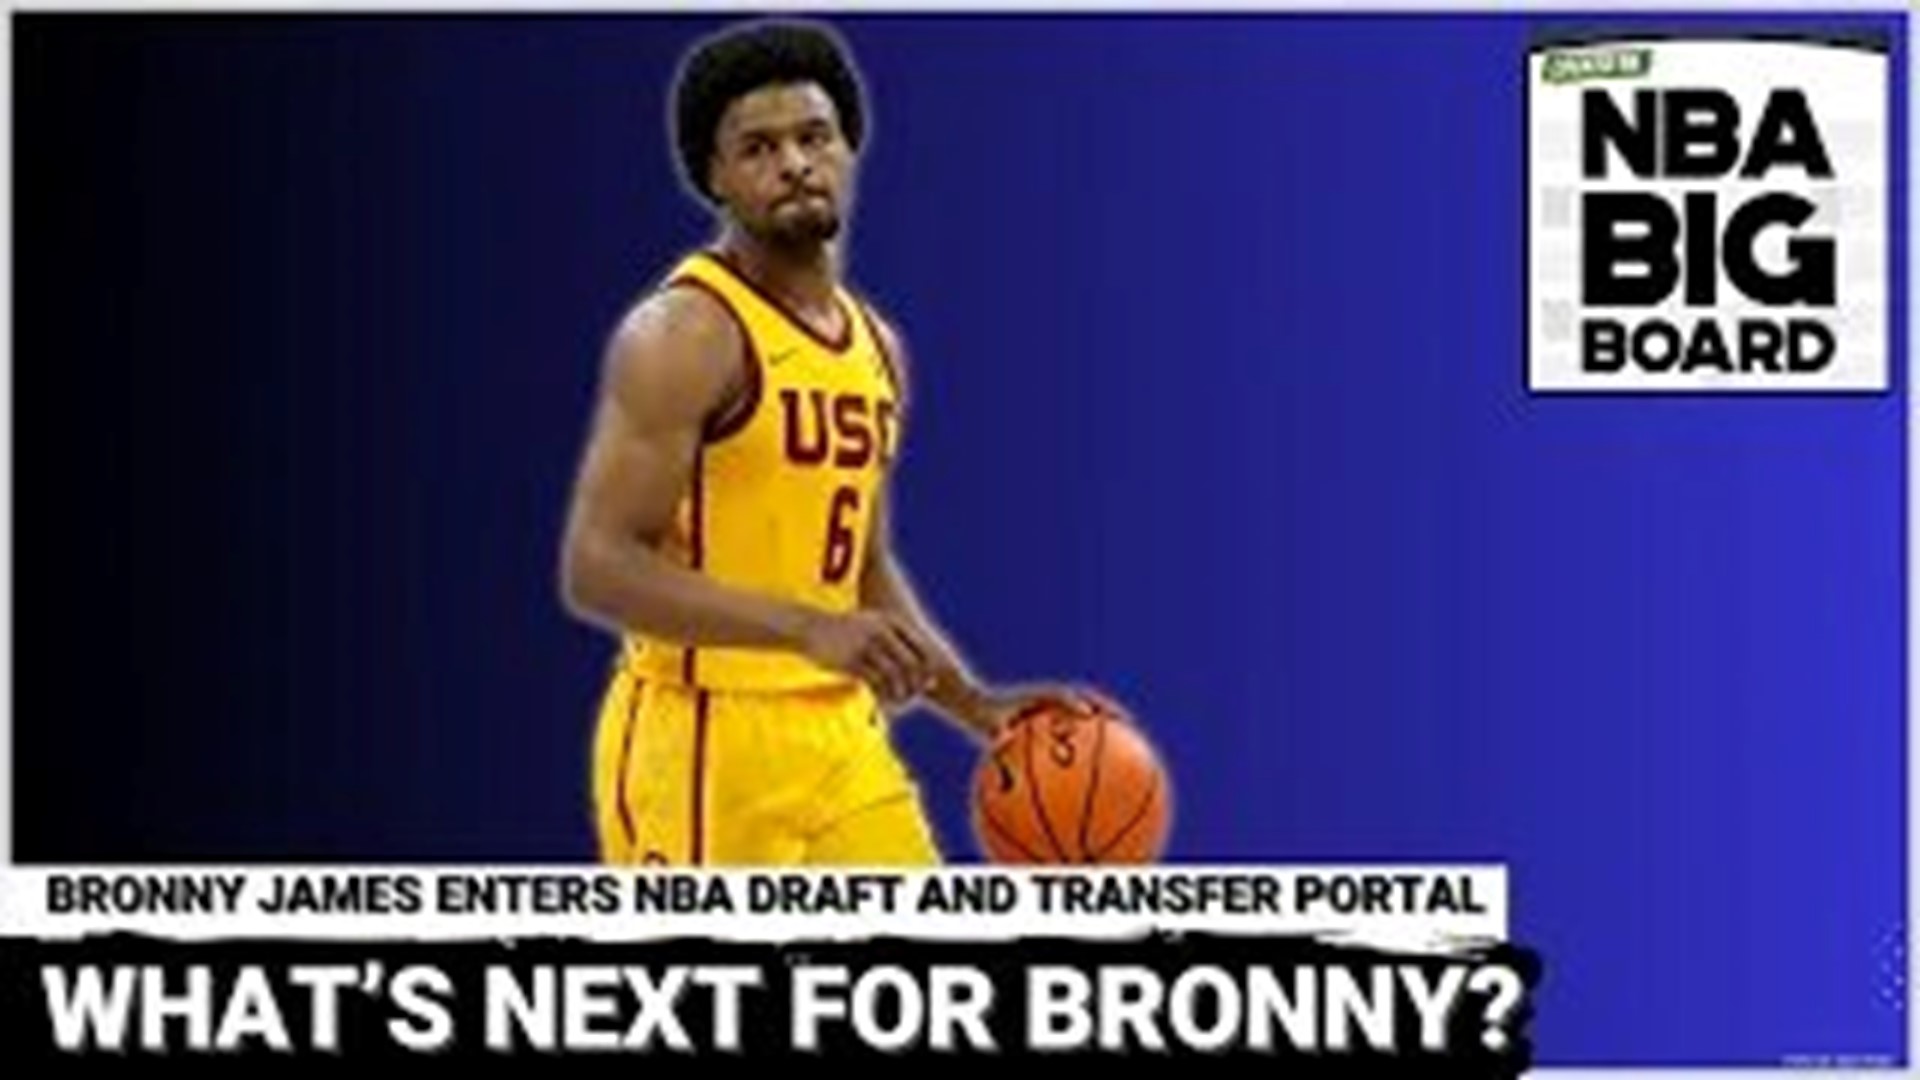 In the latest episode of NBA Big Board, hosted by Rafael Barlowe, we delve into the exciting developments surrounding Bronny James.